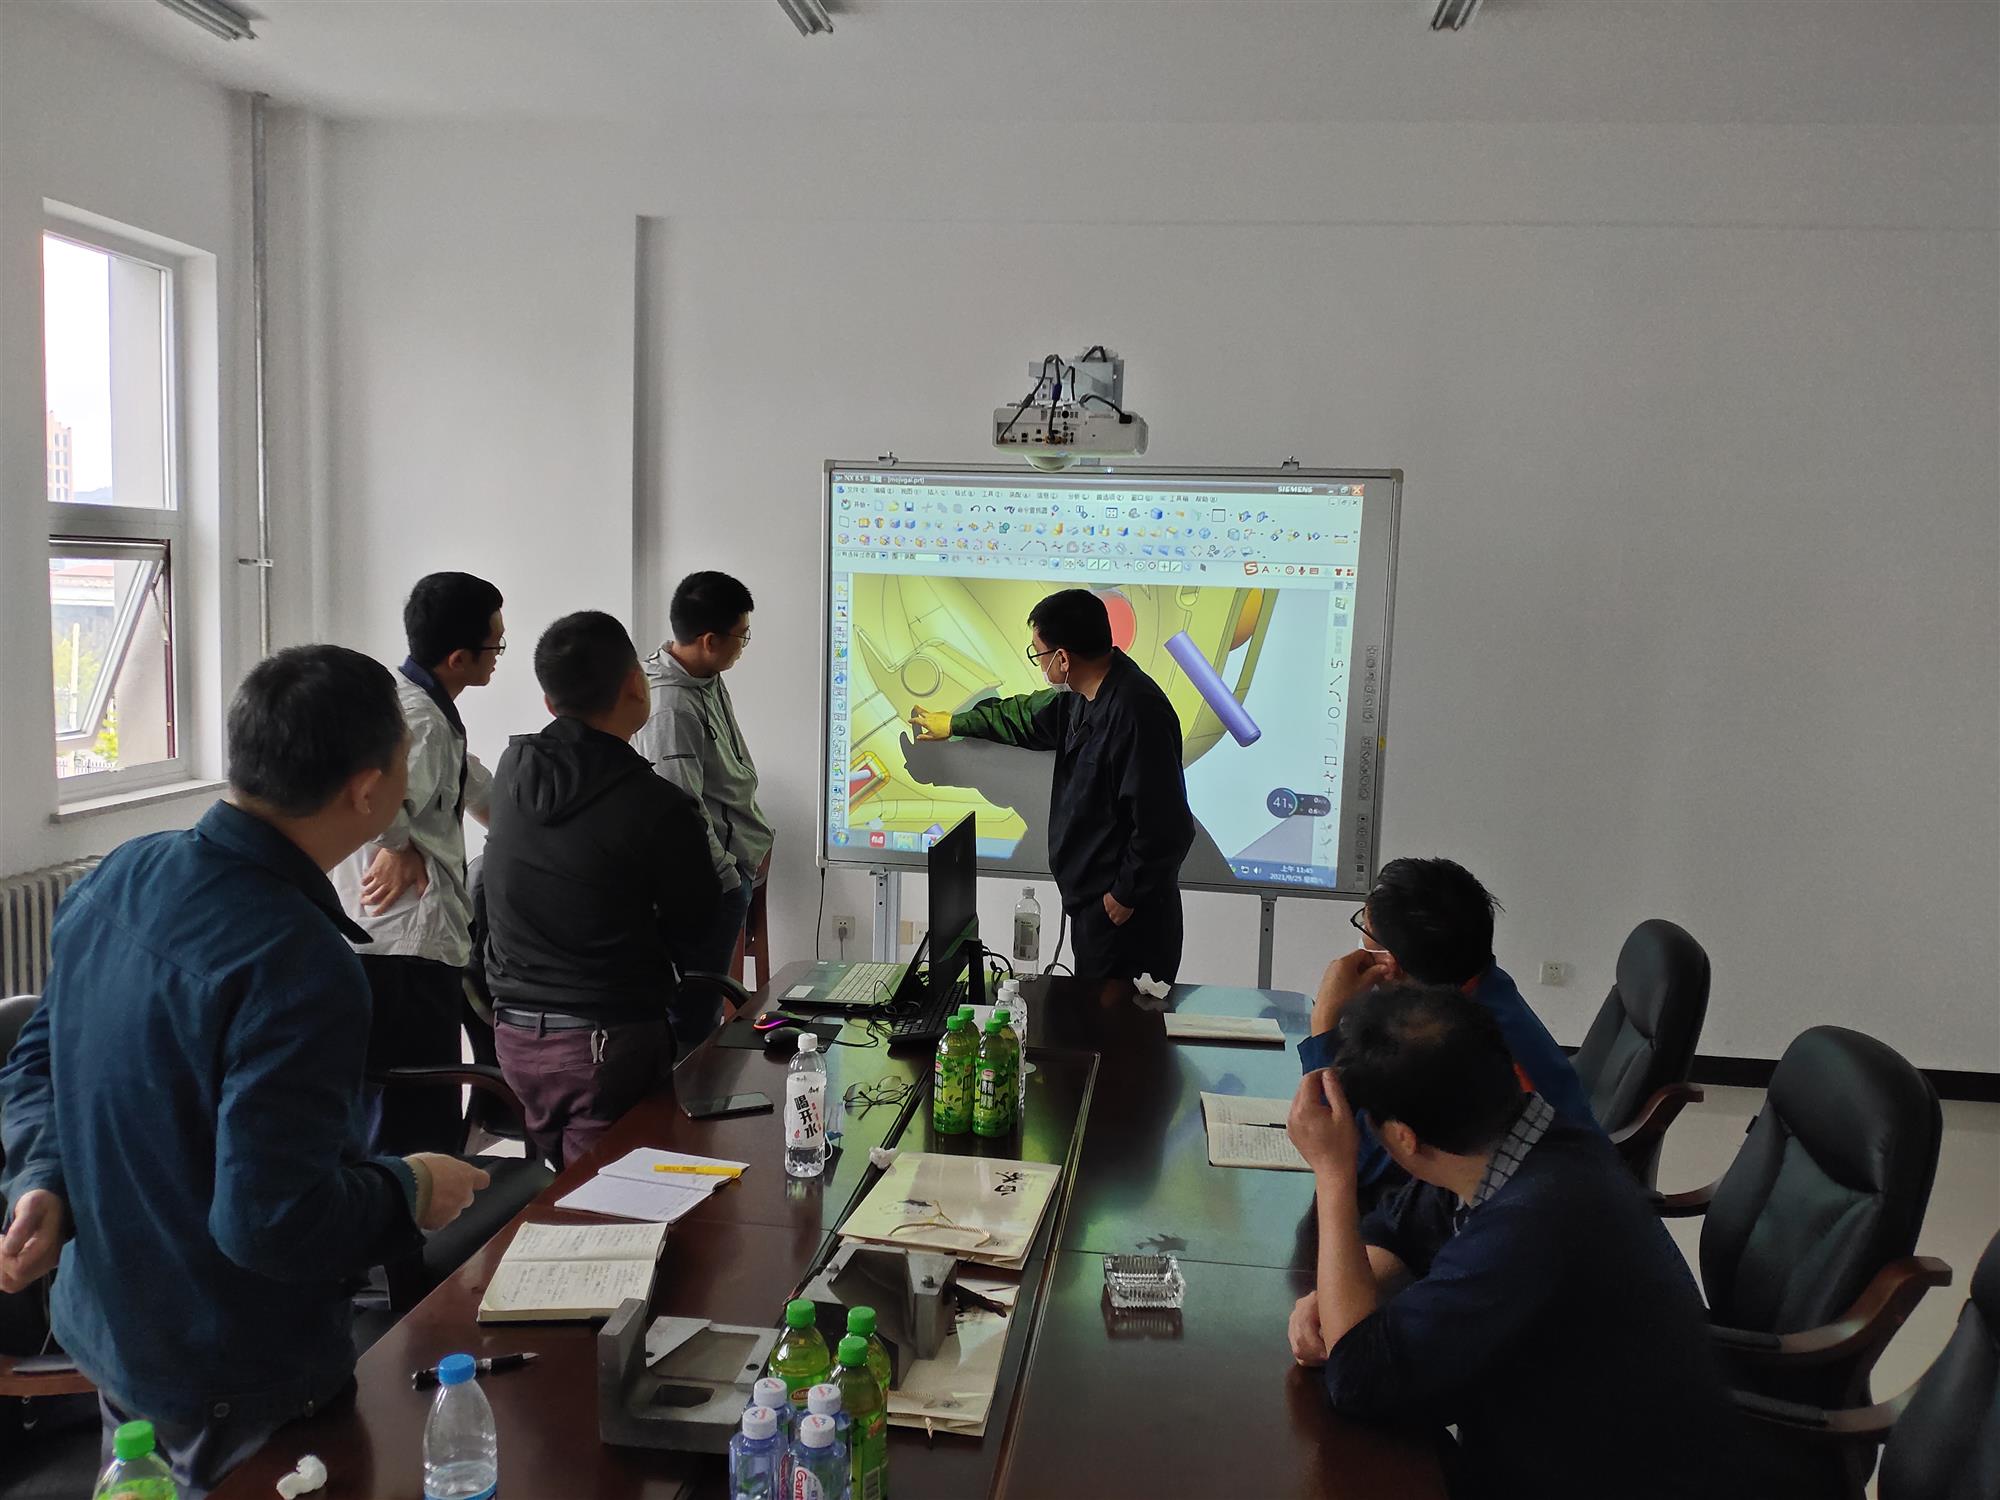 Technical experts from sinotruk group came to Jintian for guidance and exchange